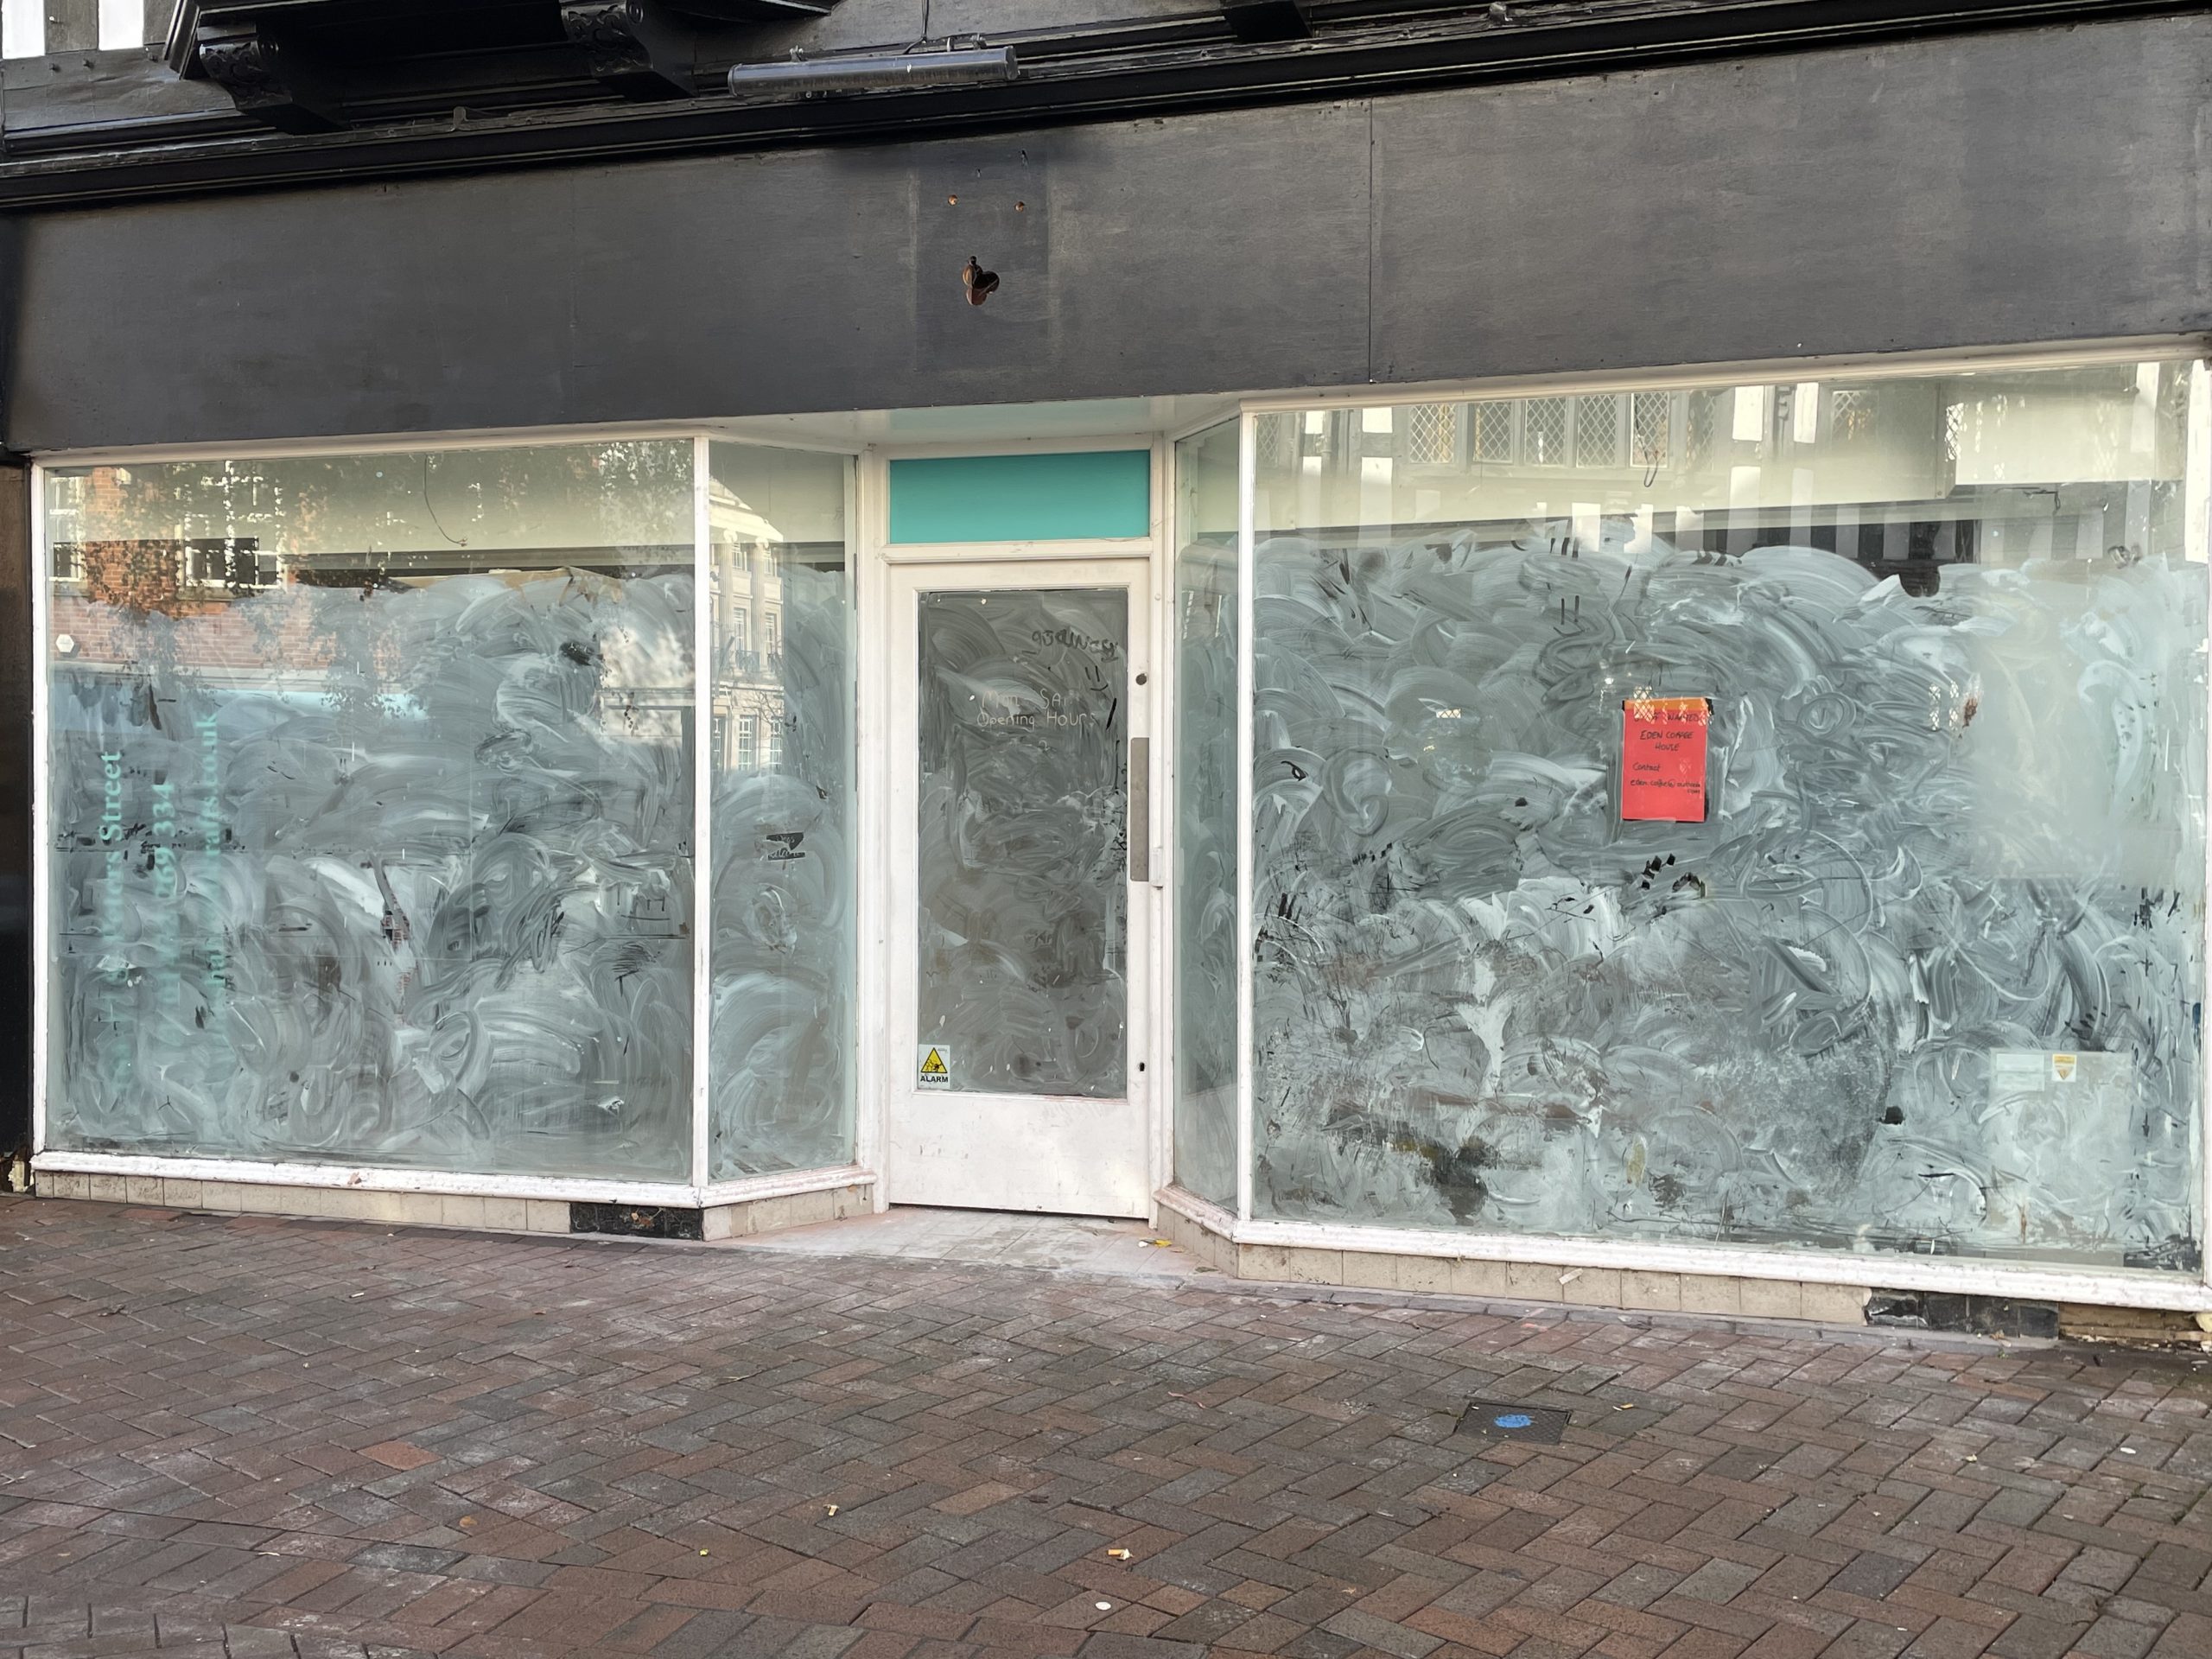 NEWS | New coffee shop set to open soon in Hereford city centre